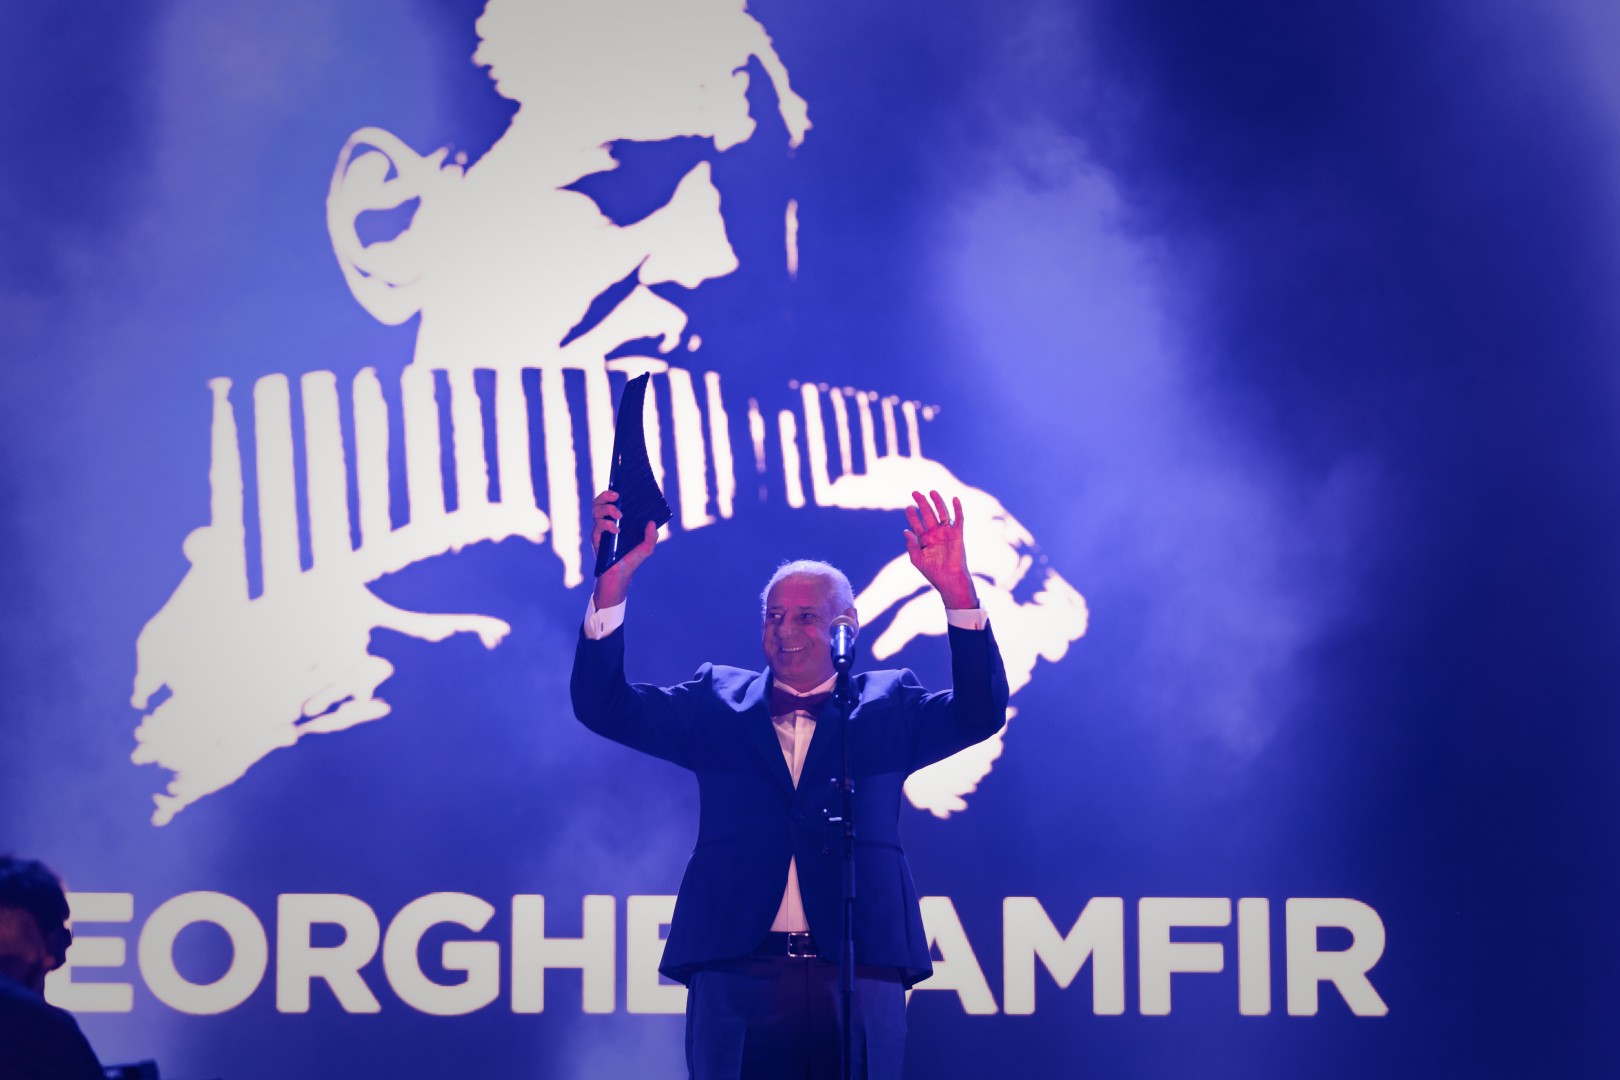 Gheorghe Zamfir at Cluj Arena in Cluj-Napoca on September 10, 2021 (0df57597c5)